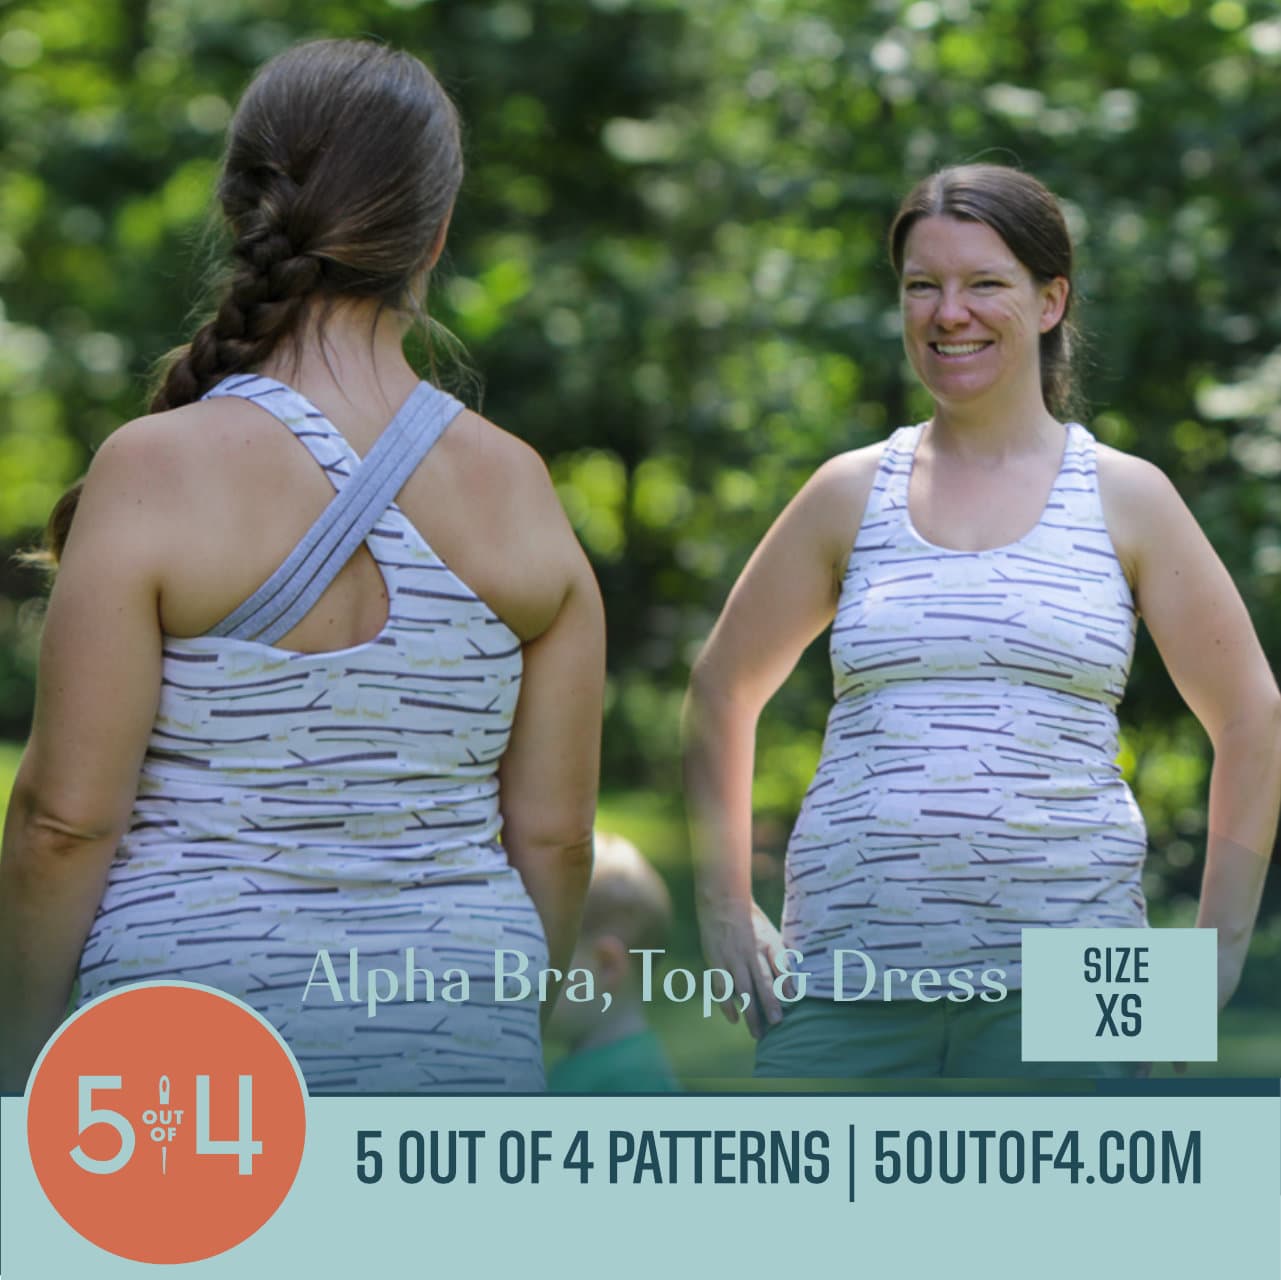 Alpha Bra, Tank, and Dress - 5 out of 4 Patterns